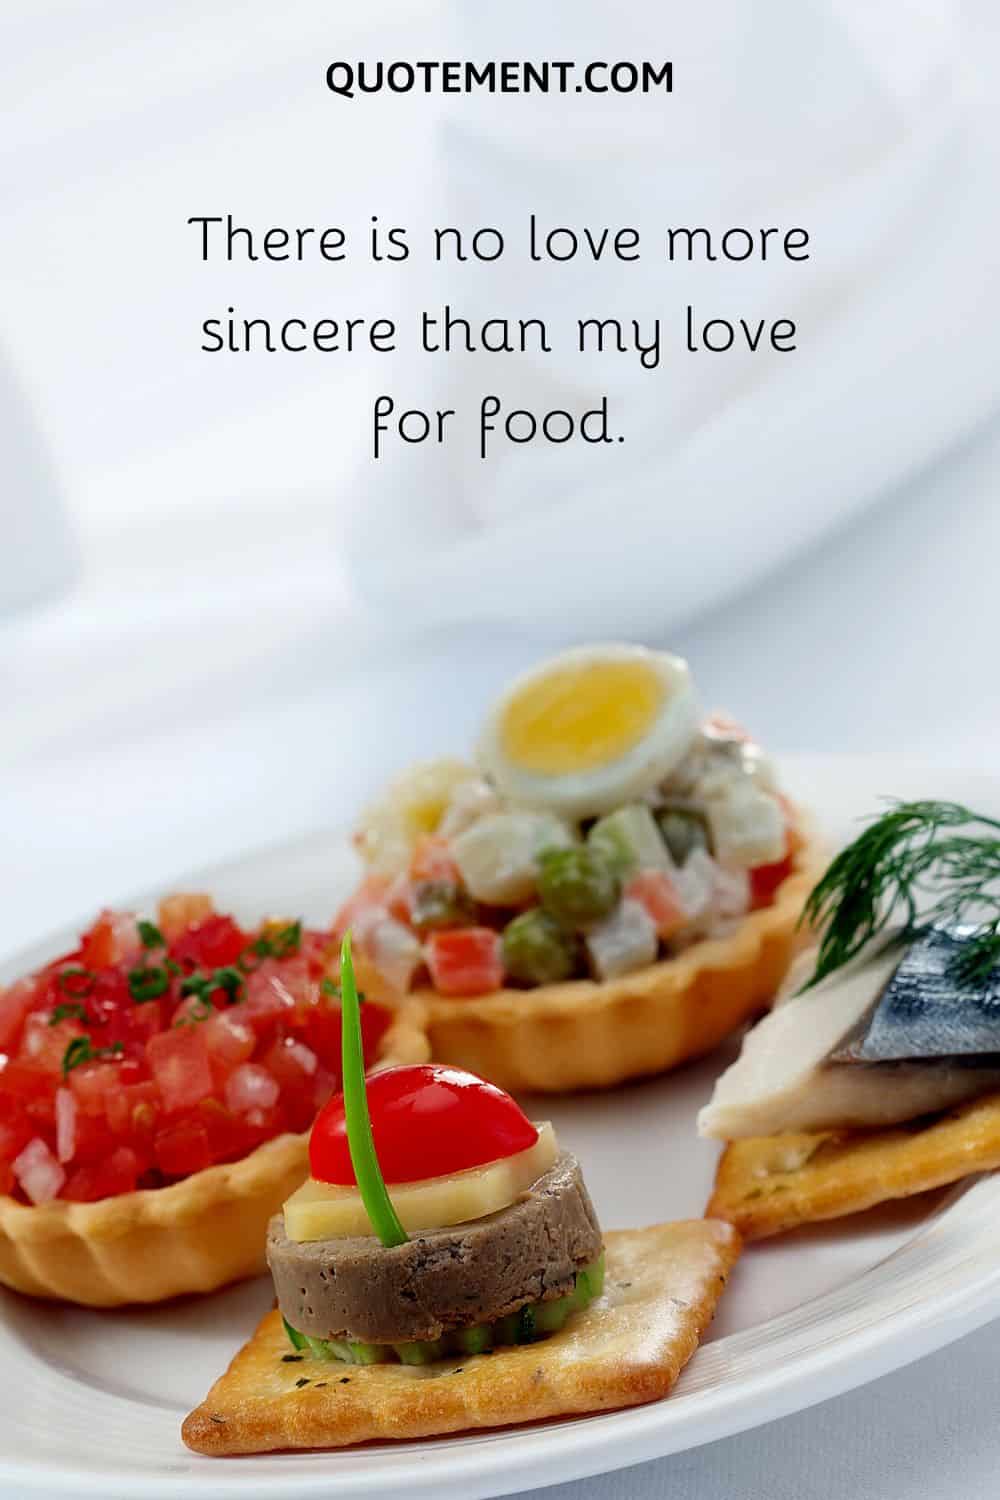 There is no love more sincere than my love for food.